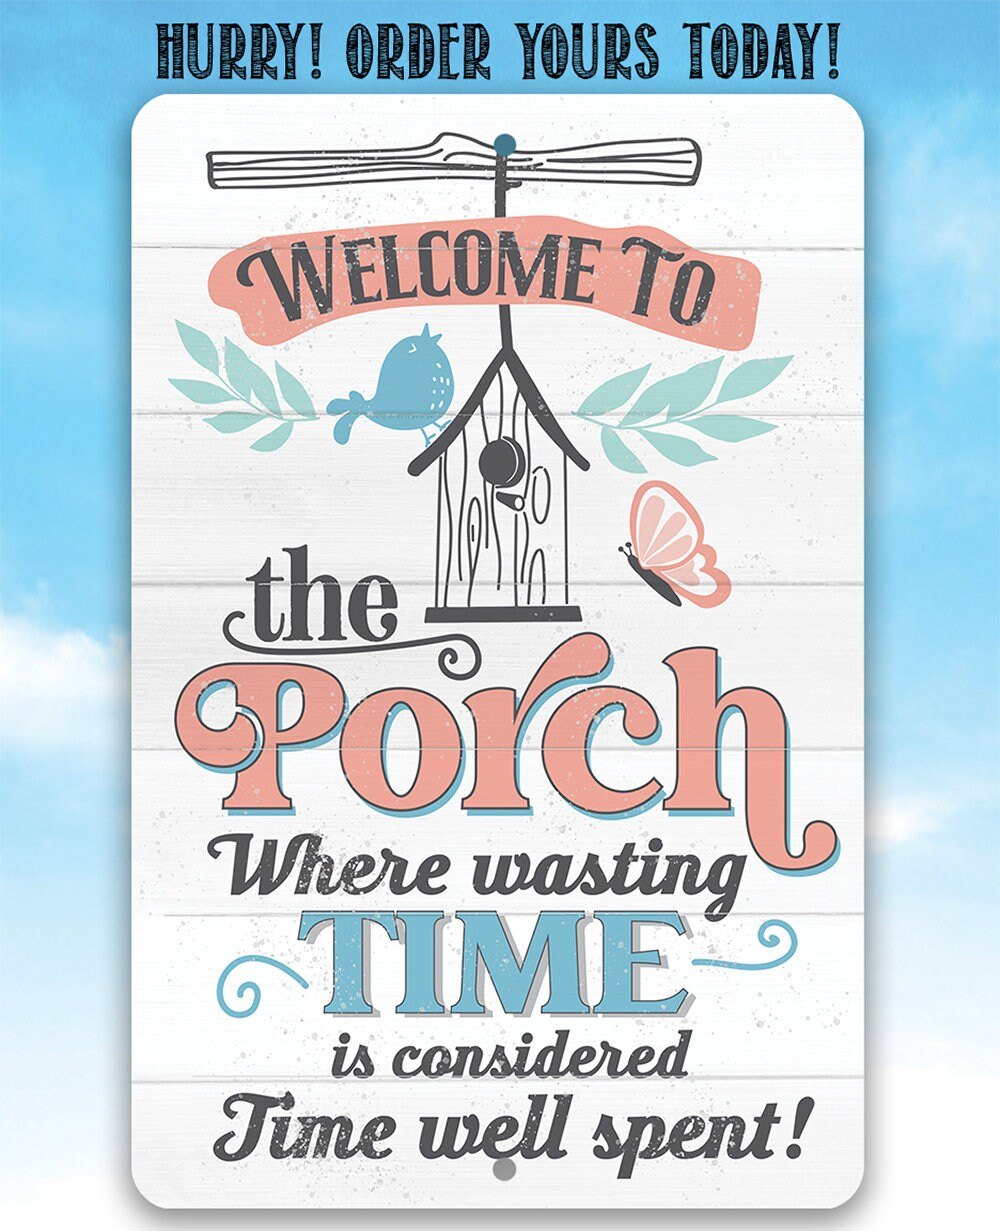 Welcome to the Porch Where Wasting Time is Considered Time Well Spent - Metal Sign Metal Sign Lone Star Art 